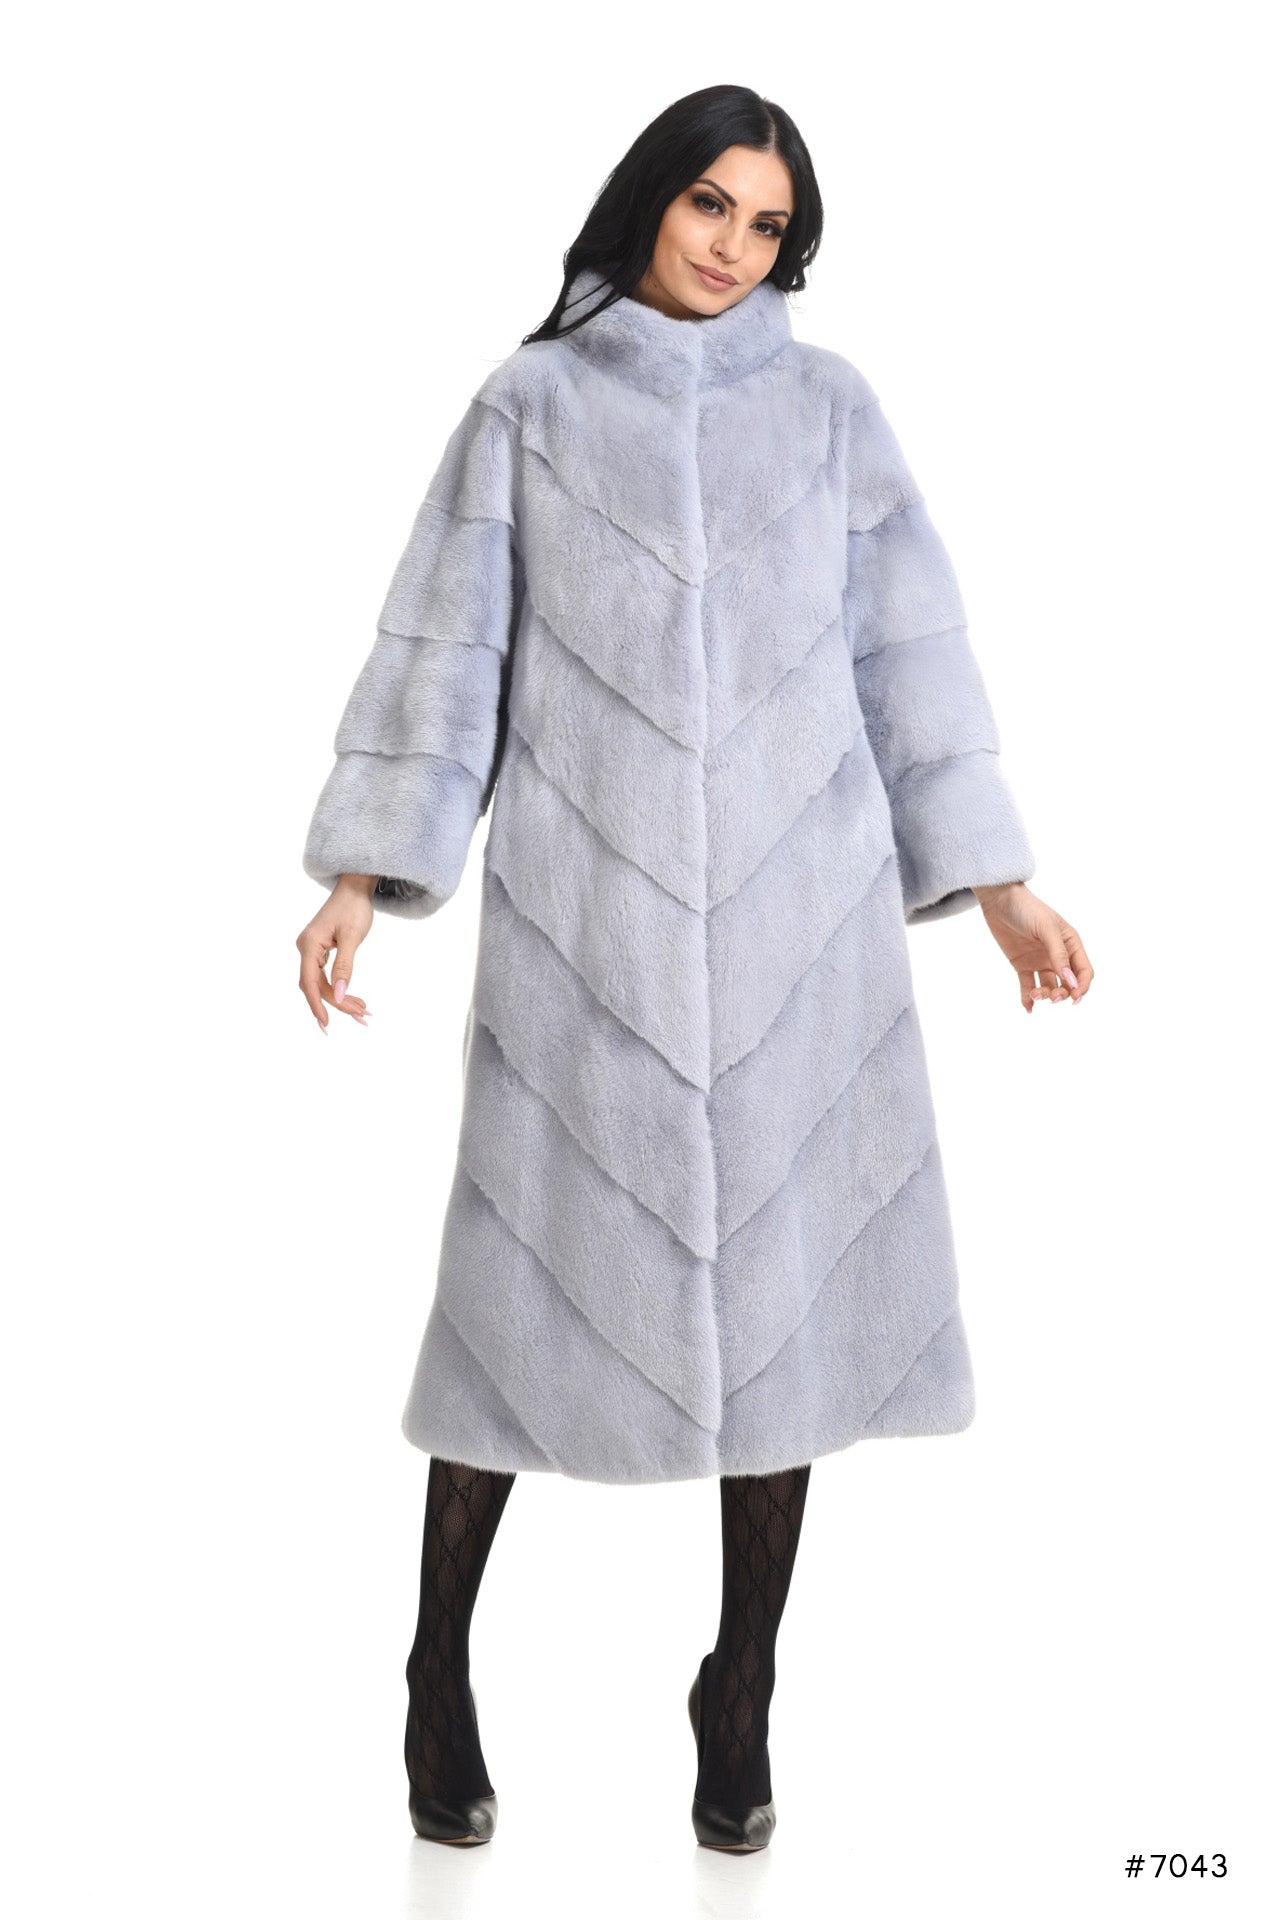 Long diagonal worked mink coat with stand up collar